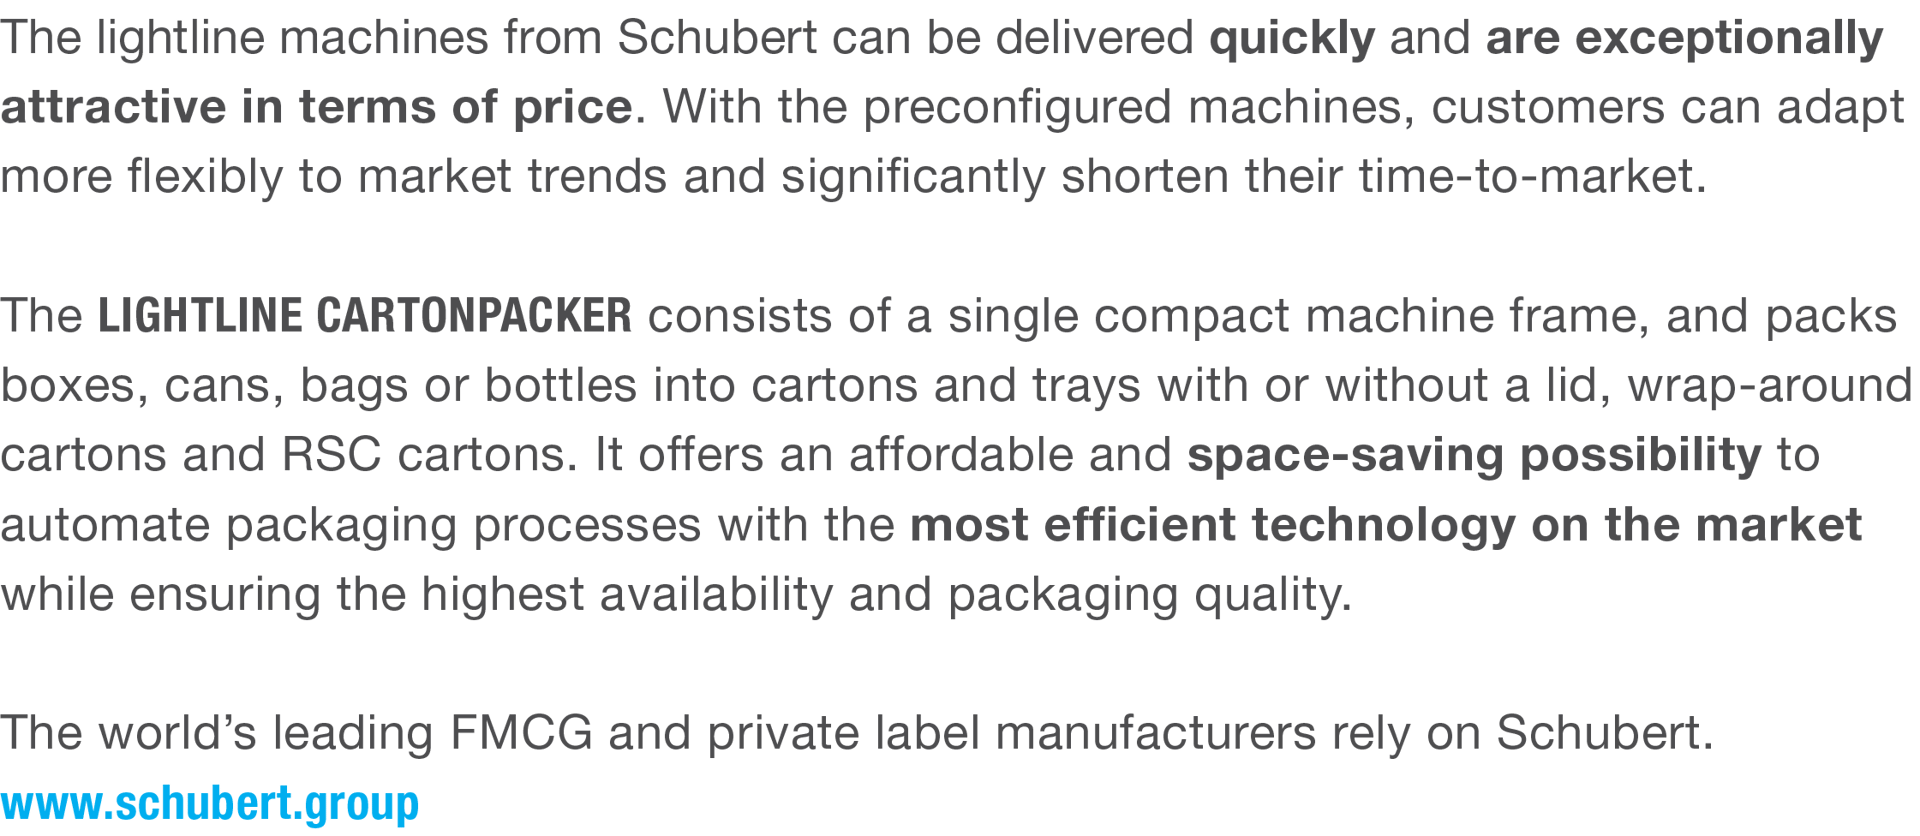 The lightline machines from Schubert can be delivered quickly and are exceptionally attractive in terms of price.